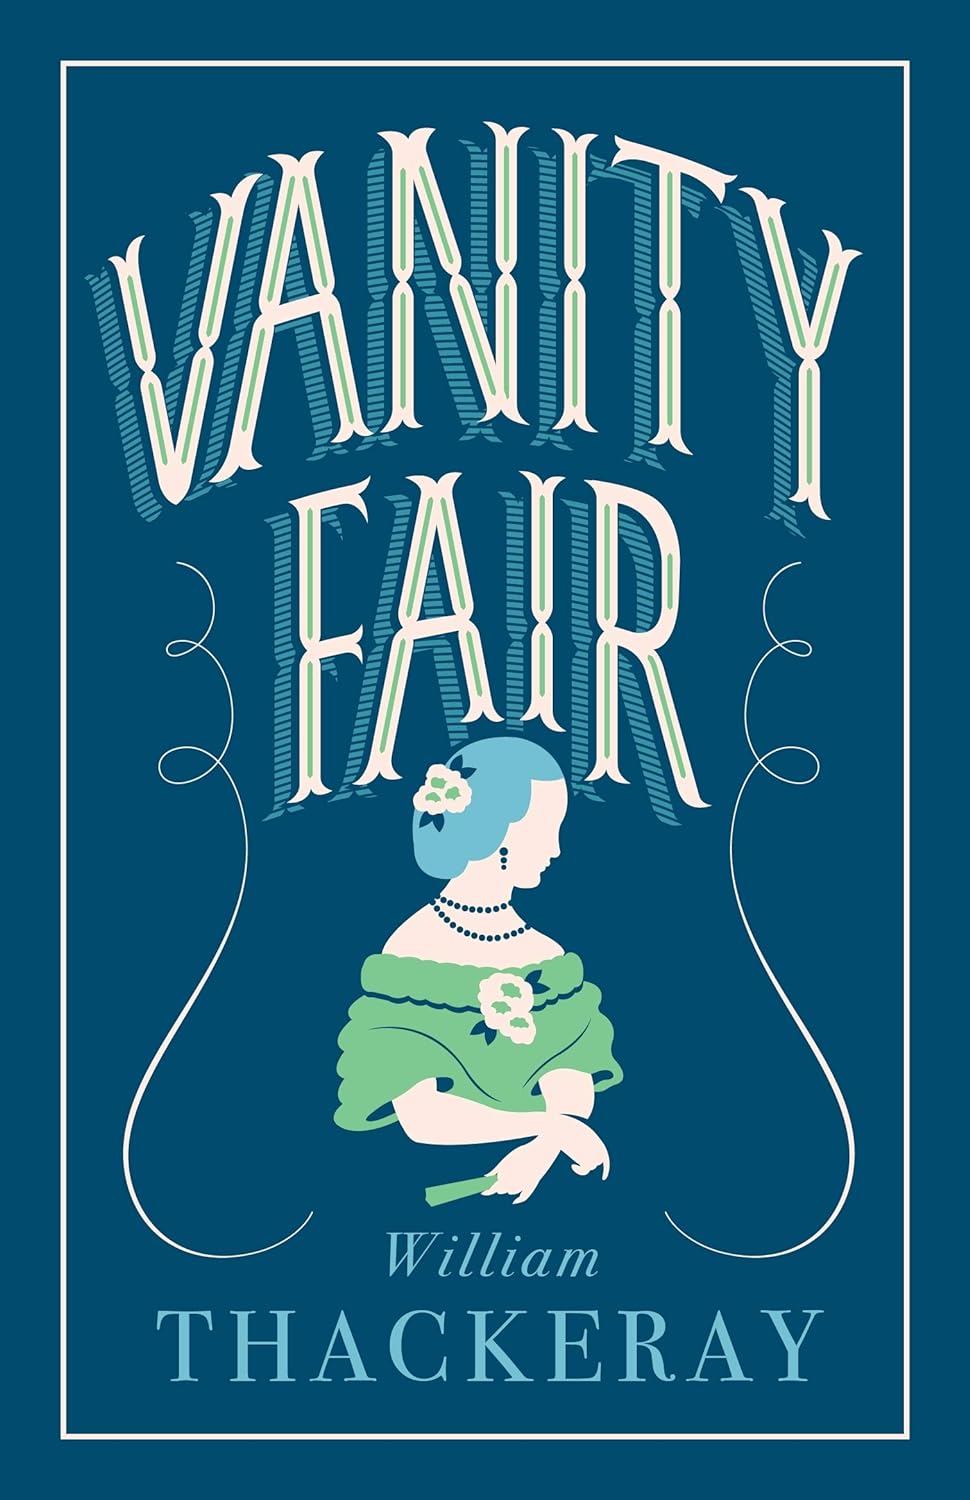 Sách Ngoại Văn - Vanity Fair (Evergreens) Paperback by William Makepeace Thackeray (Author)